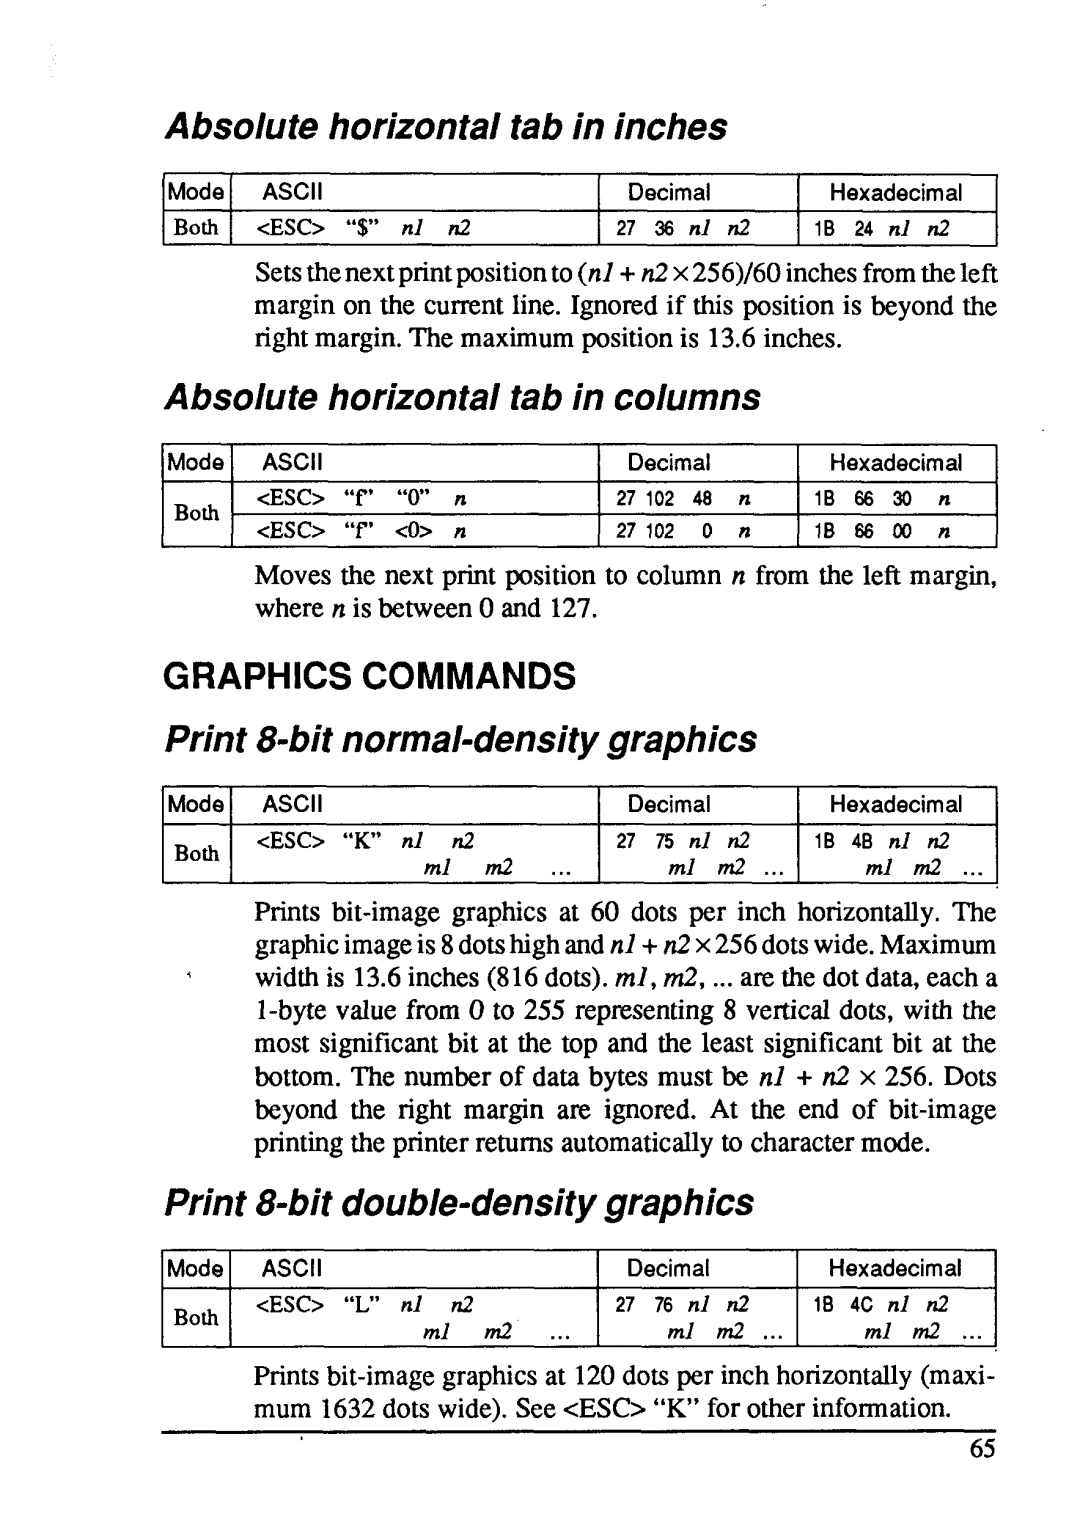 Star Micronics LC24-15 user manual Absolute horizontal tab in inches, Absolute horizontal tab in columns, Graphics Commands 